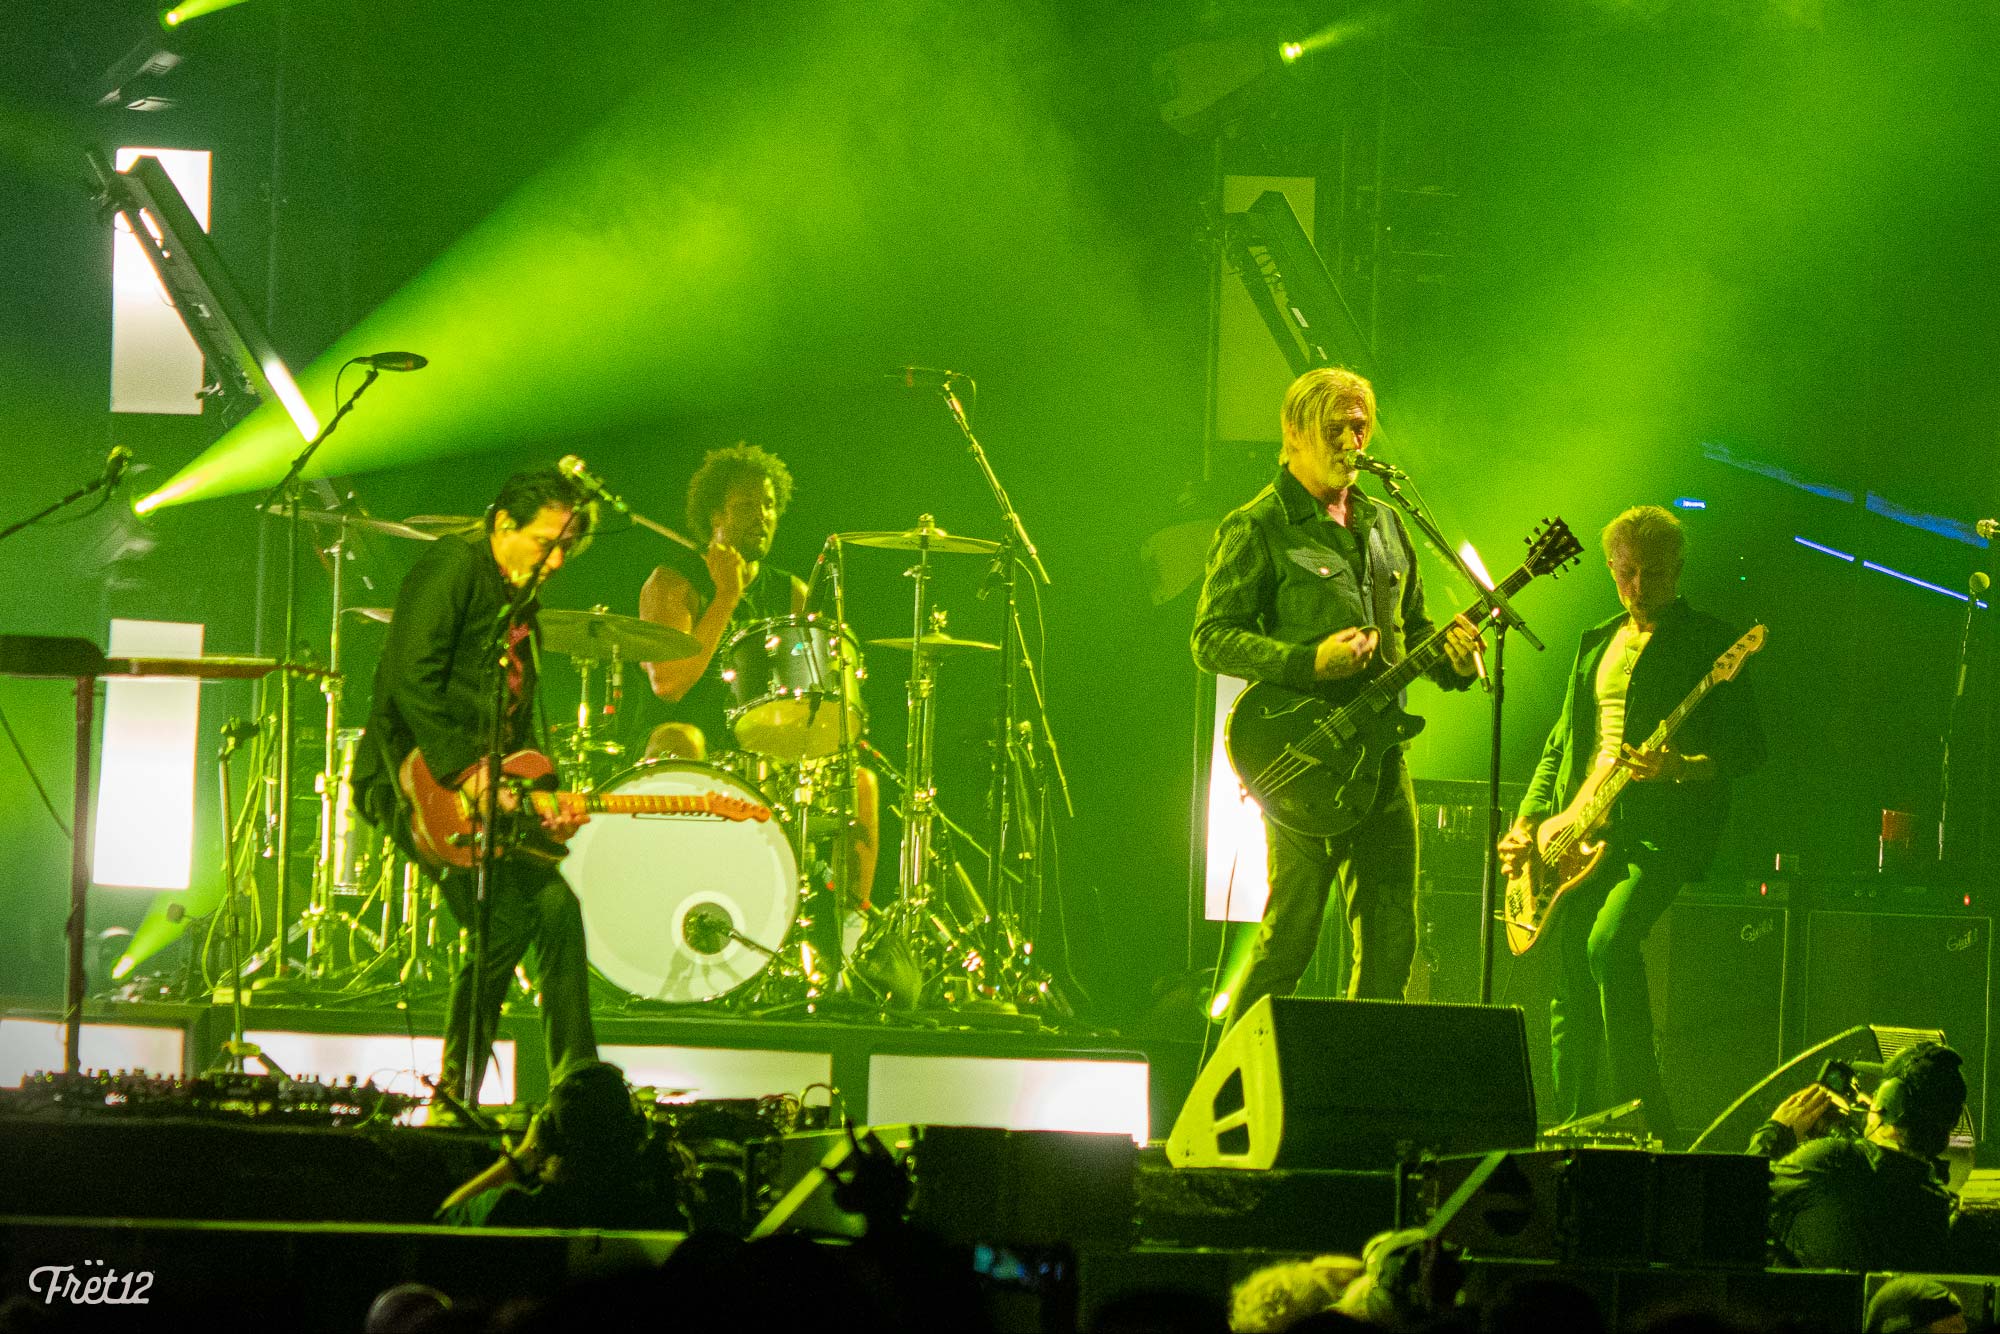 Queens of the Stone Age at Riot Fest - Photos by FRET12